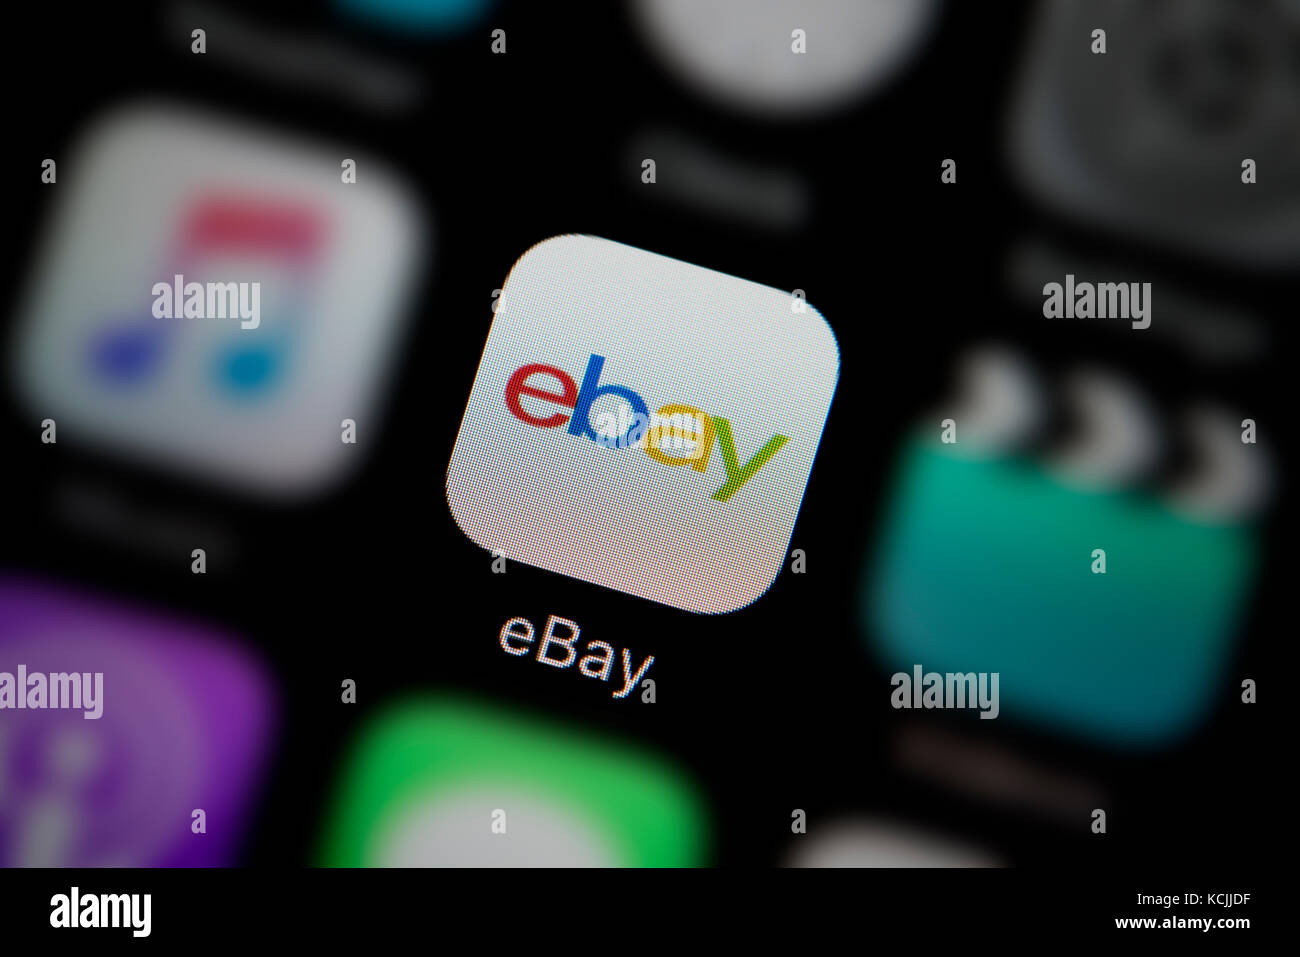 A close-up shot of the company logo representing the ebay app icon, as seen on the screen of a smart phone (Editorial use only) Stock Photo